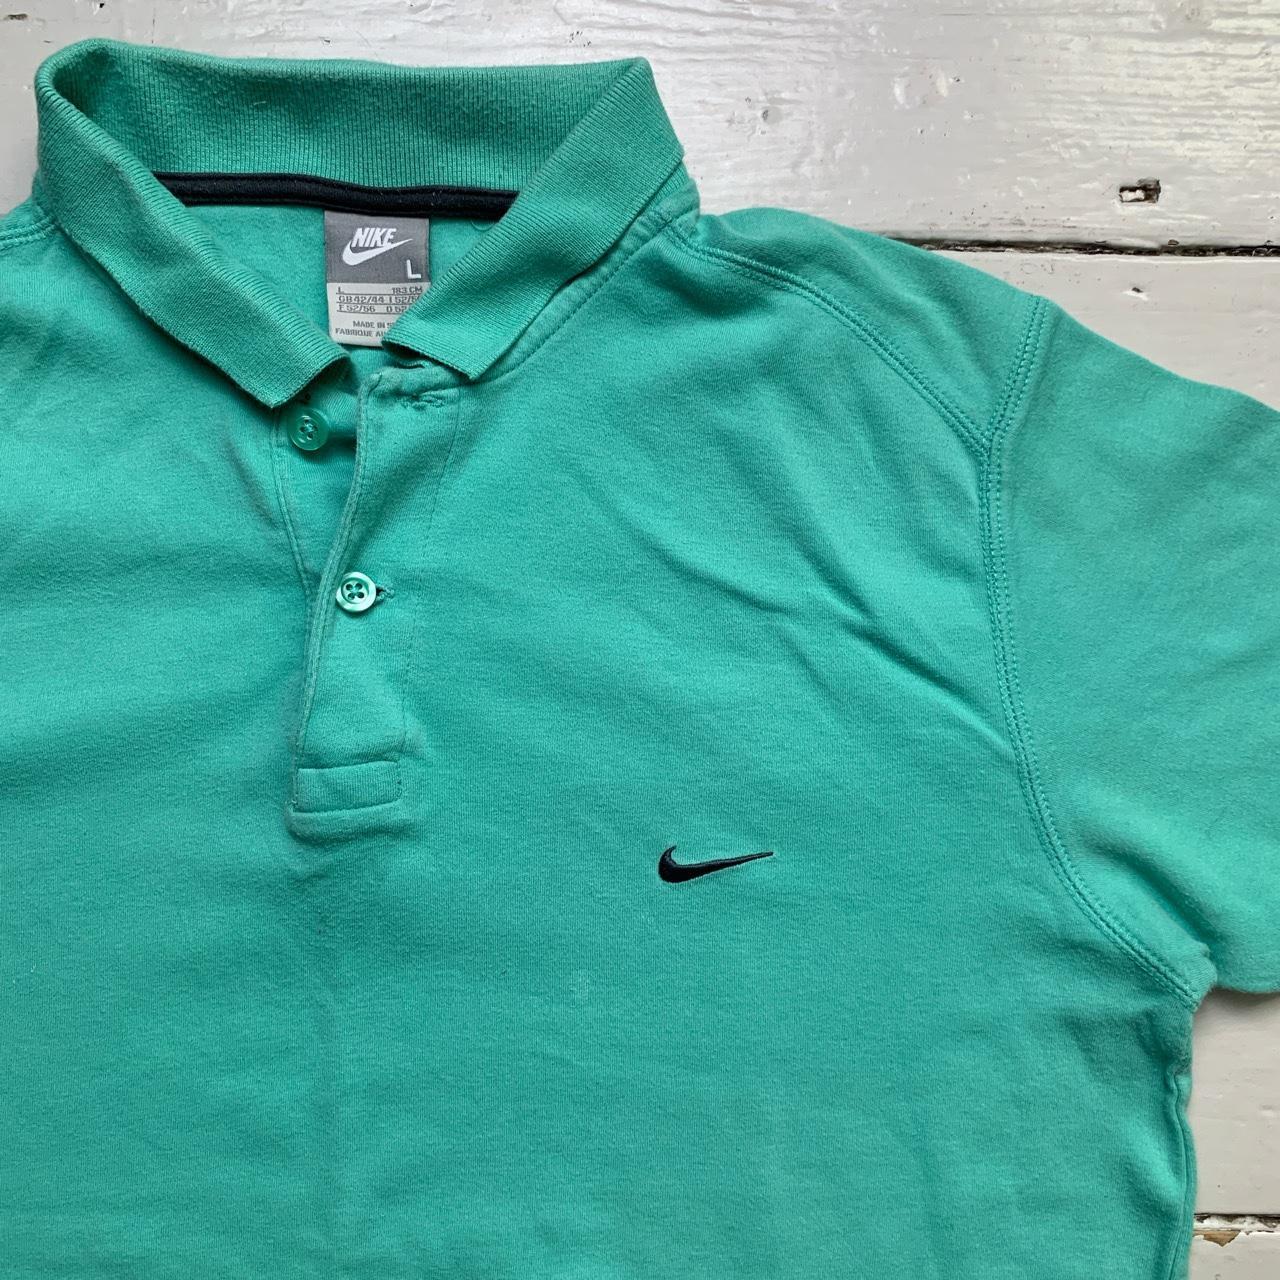 Nike Swoosh Vintage Polo Green and Black